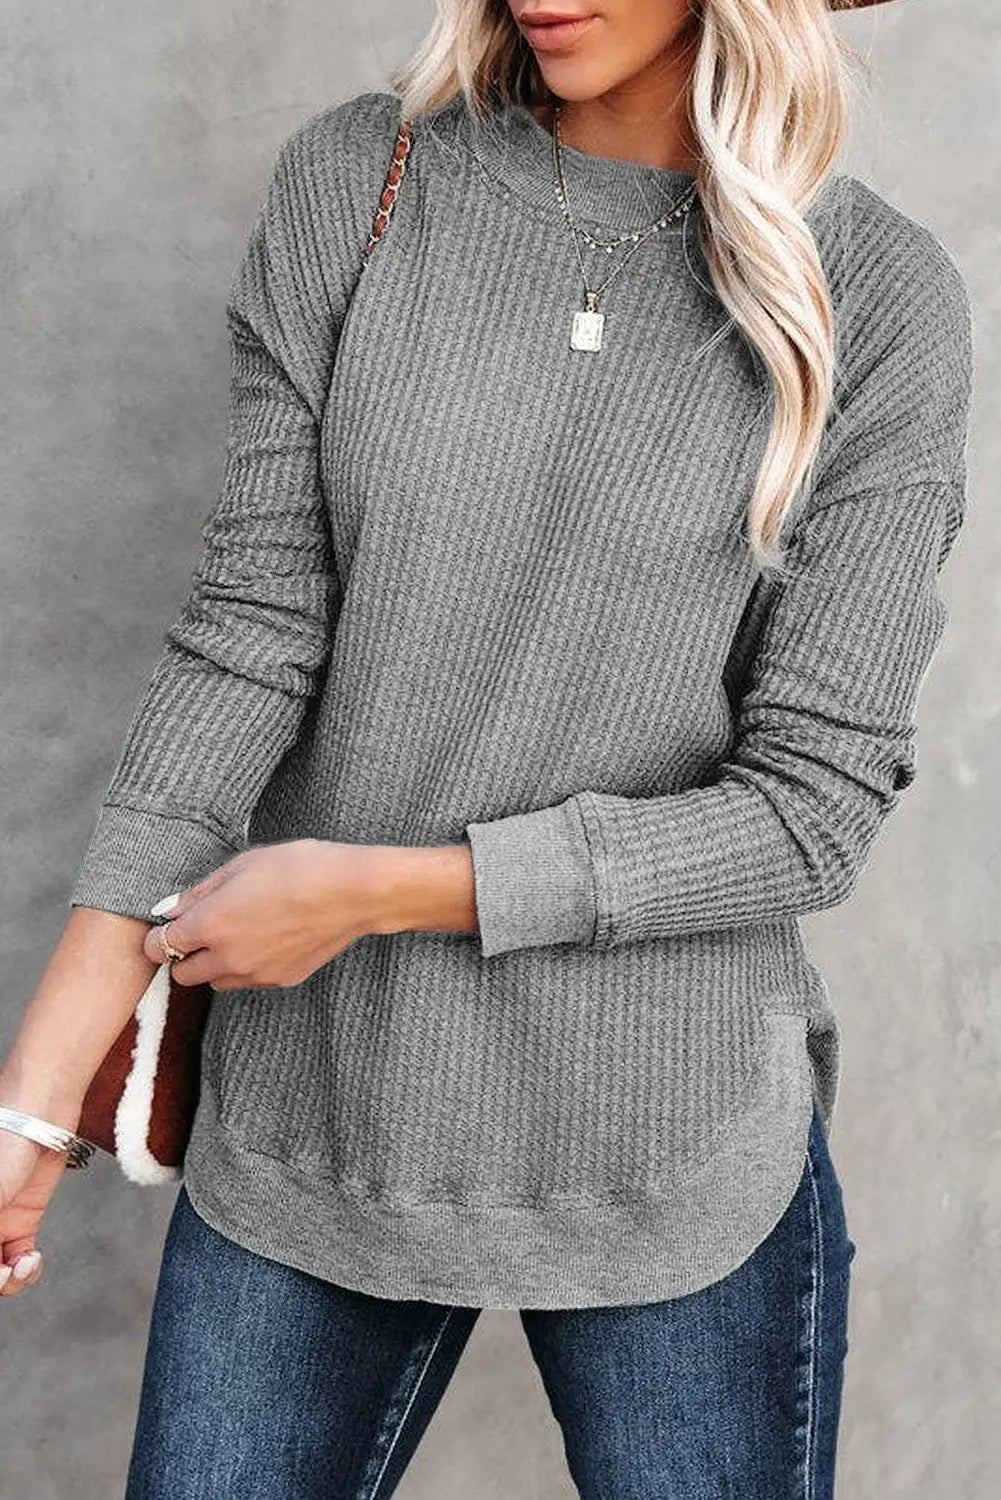 Pink crew neck ribbed trim waffle knit top - gray / s / 62.7% polyester + 37.3% cotton - long sleeve tops